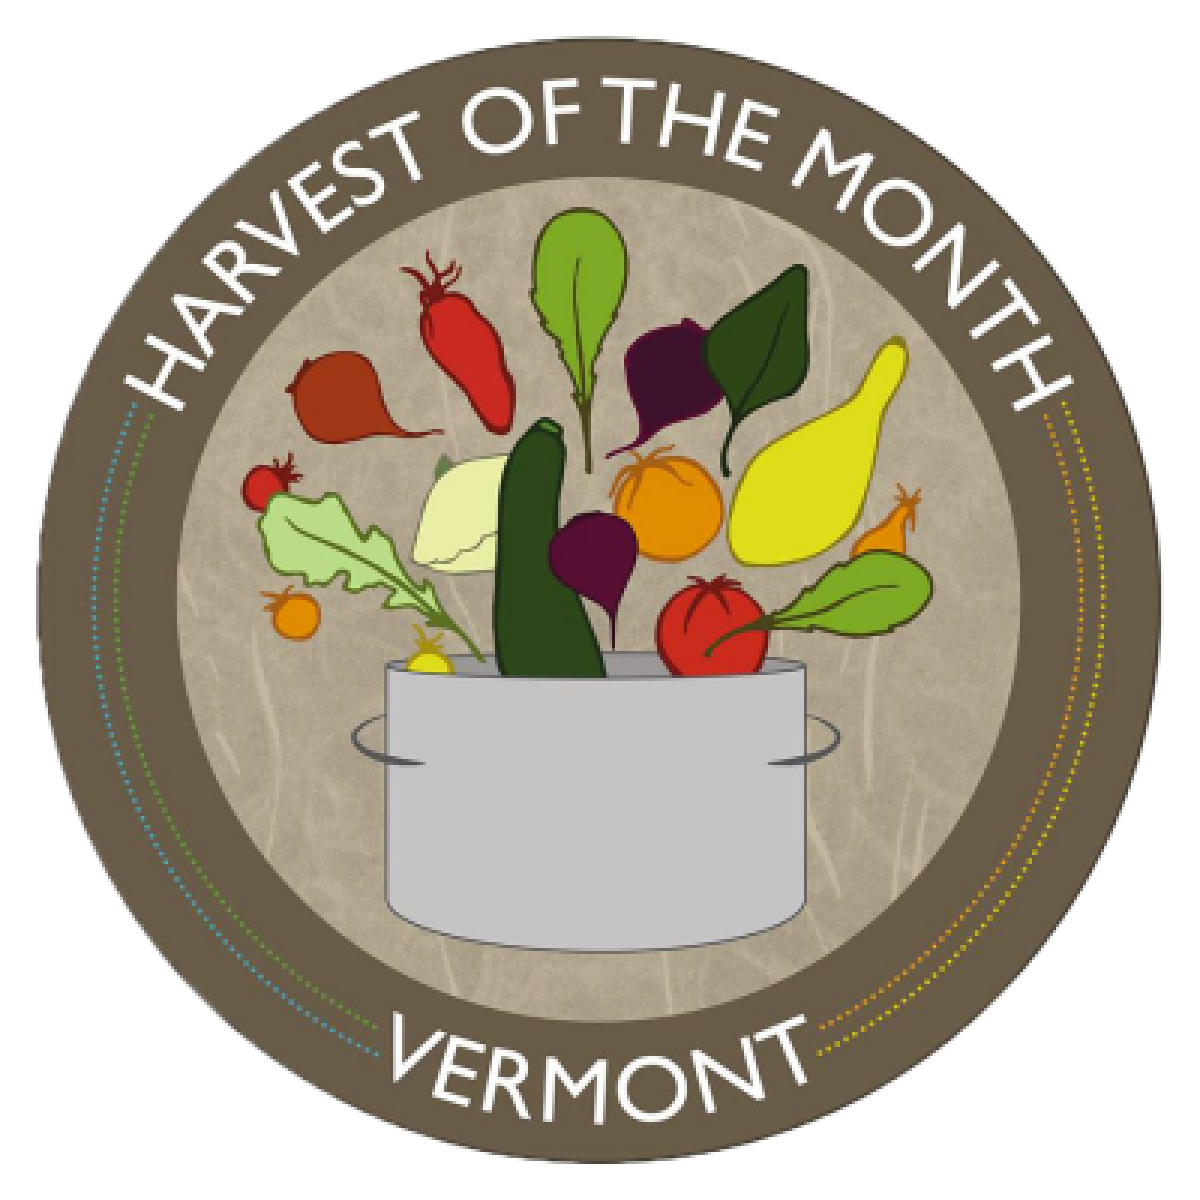 Harvest of the Month Vermont